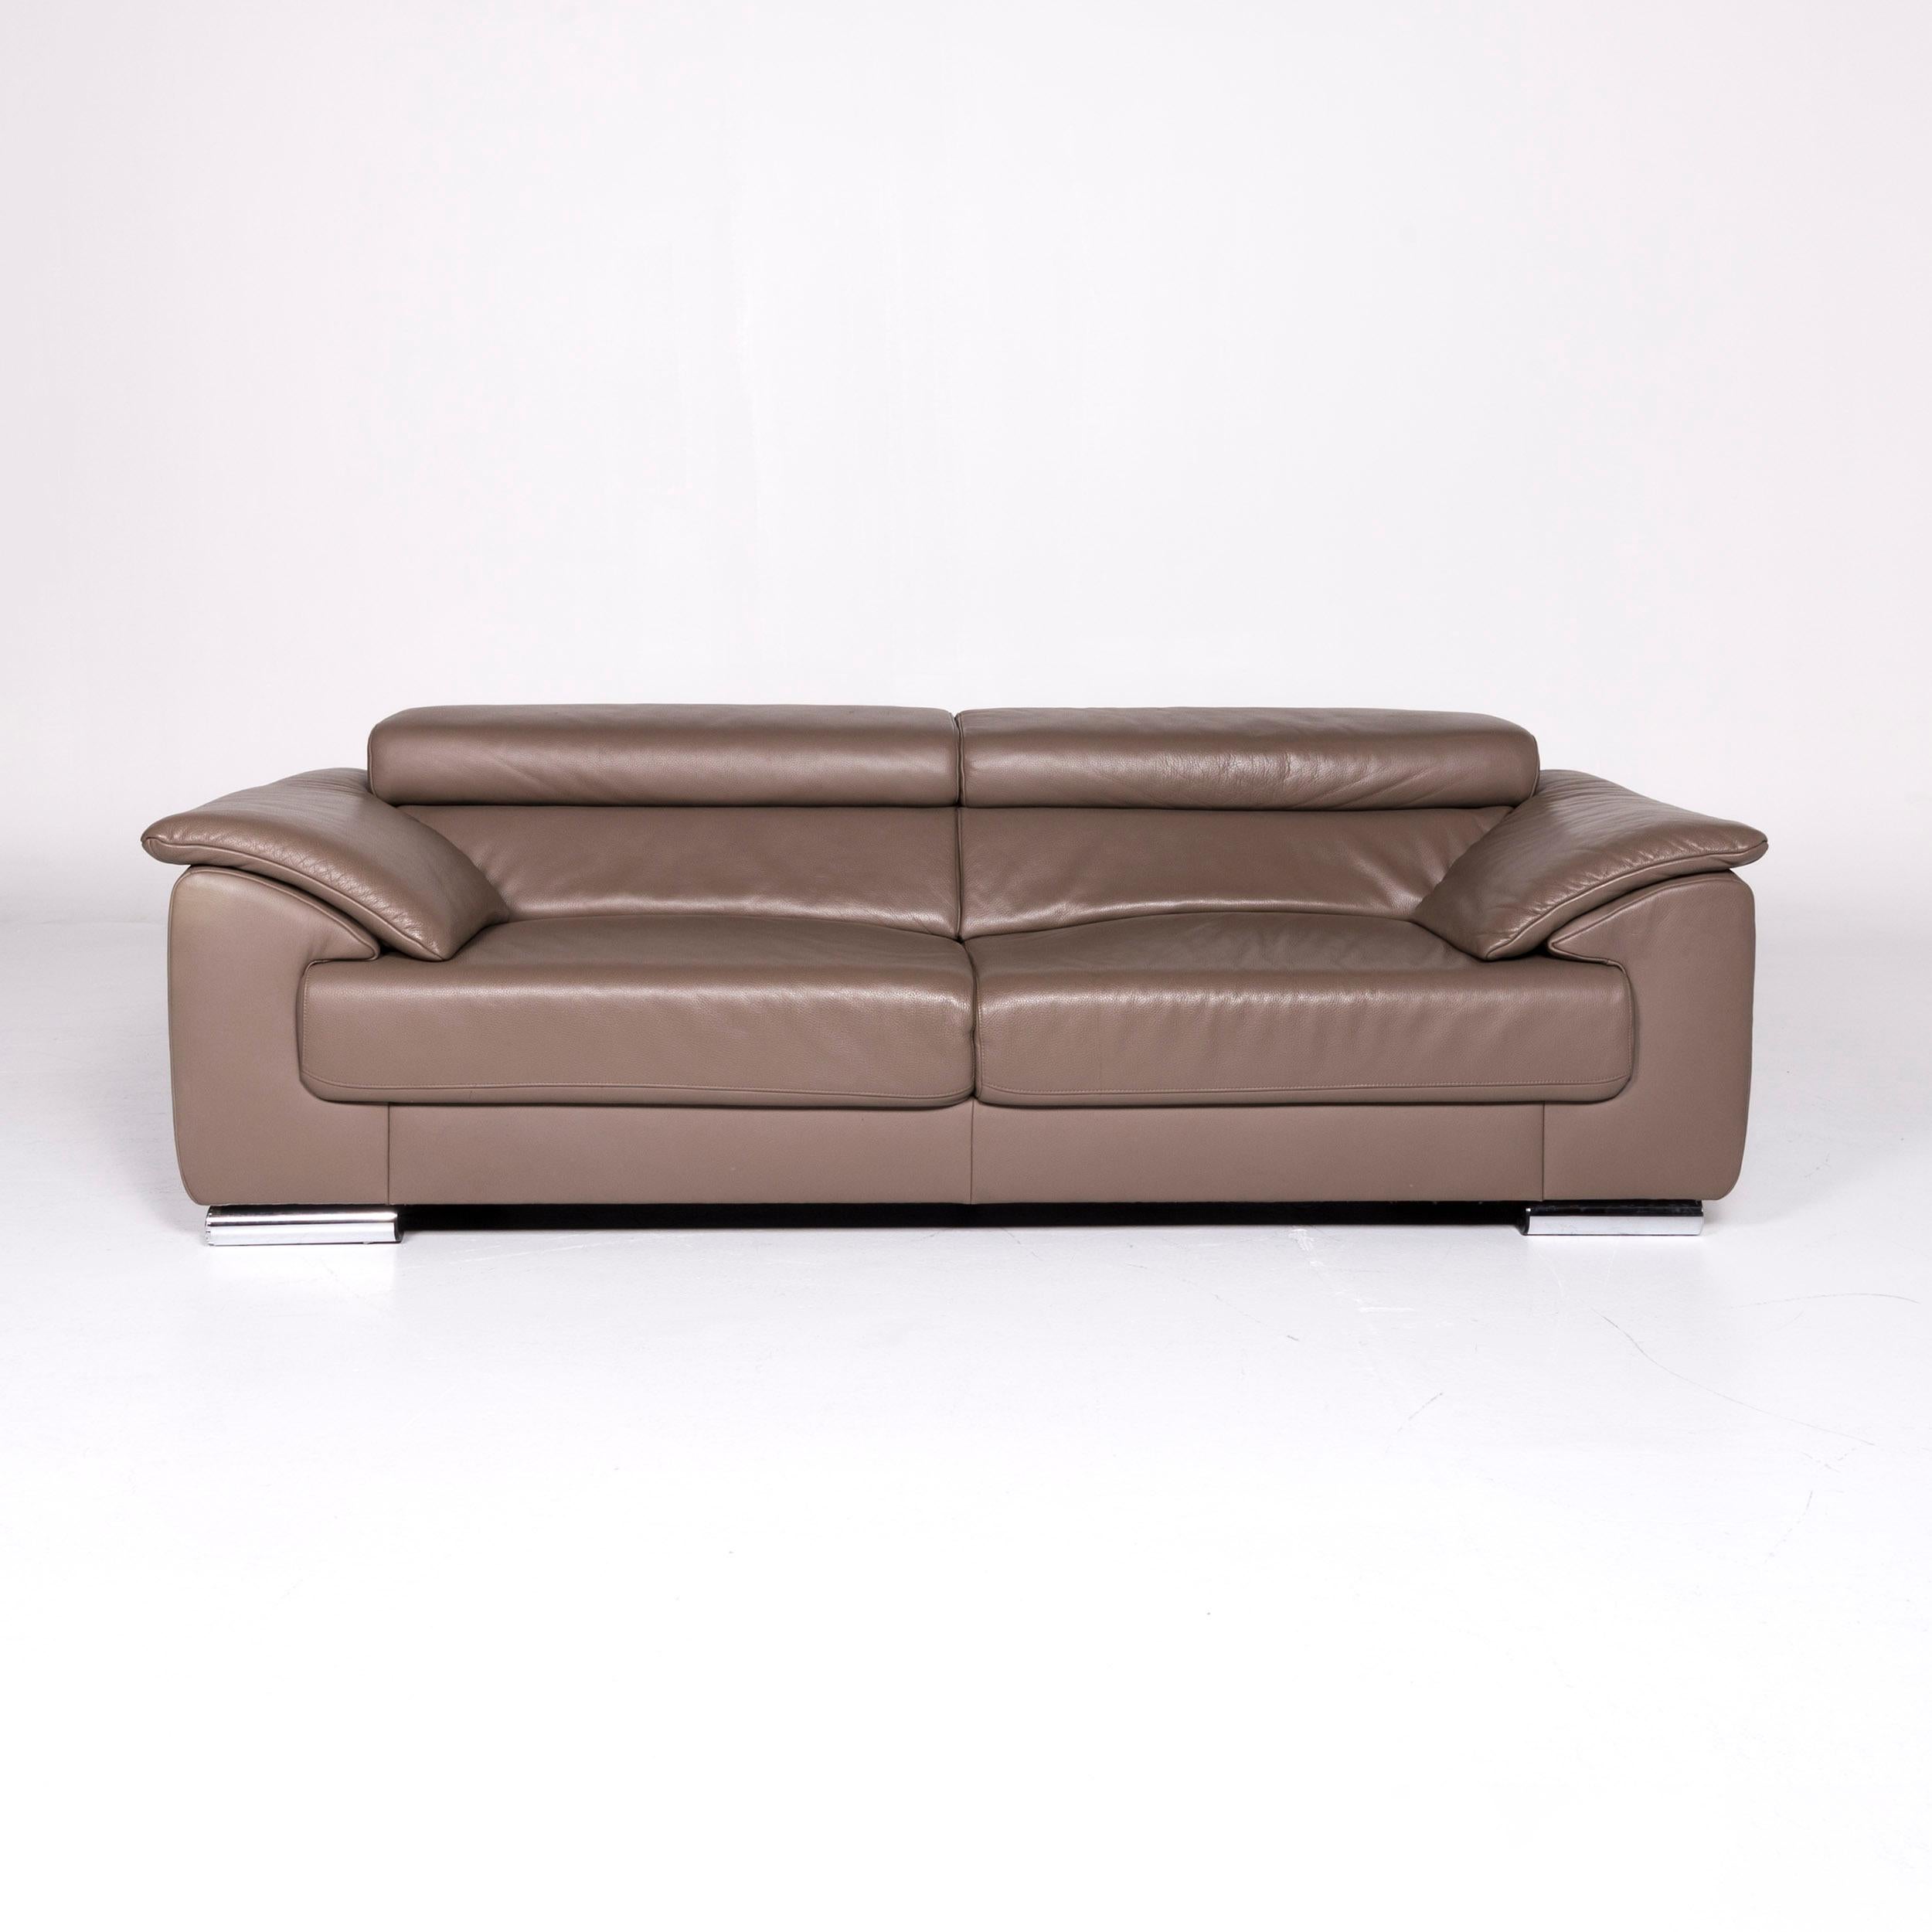 We bring to you a Ewald Schillig brand blues leather sofa brown three-seat.

Product measurements in centimeters:
 
Depth 103
Width 229
Height 72
Seat-height 40
Rest-height 60
Seat-depth 56
Seat-width 145
Back-height 32.
    